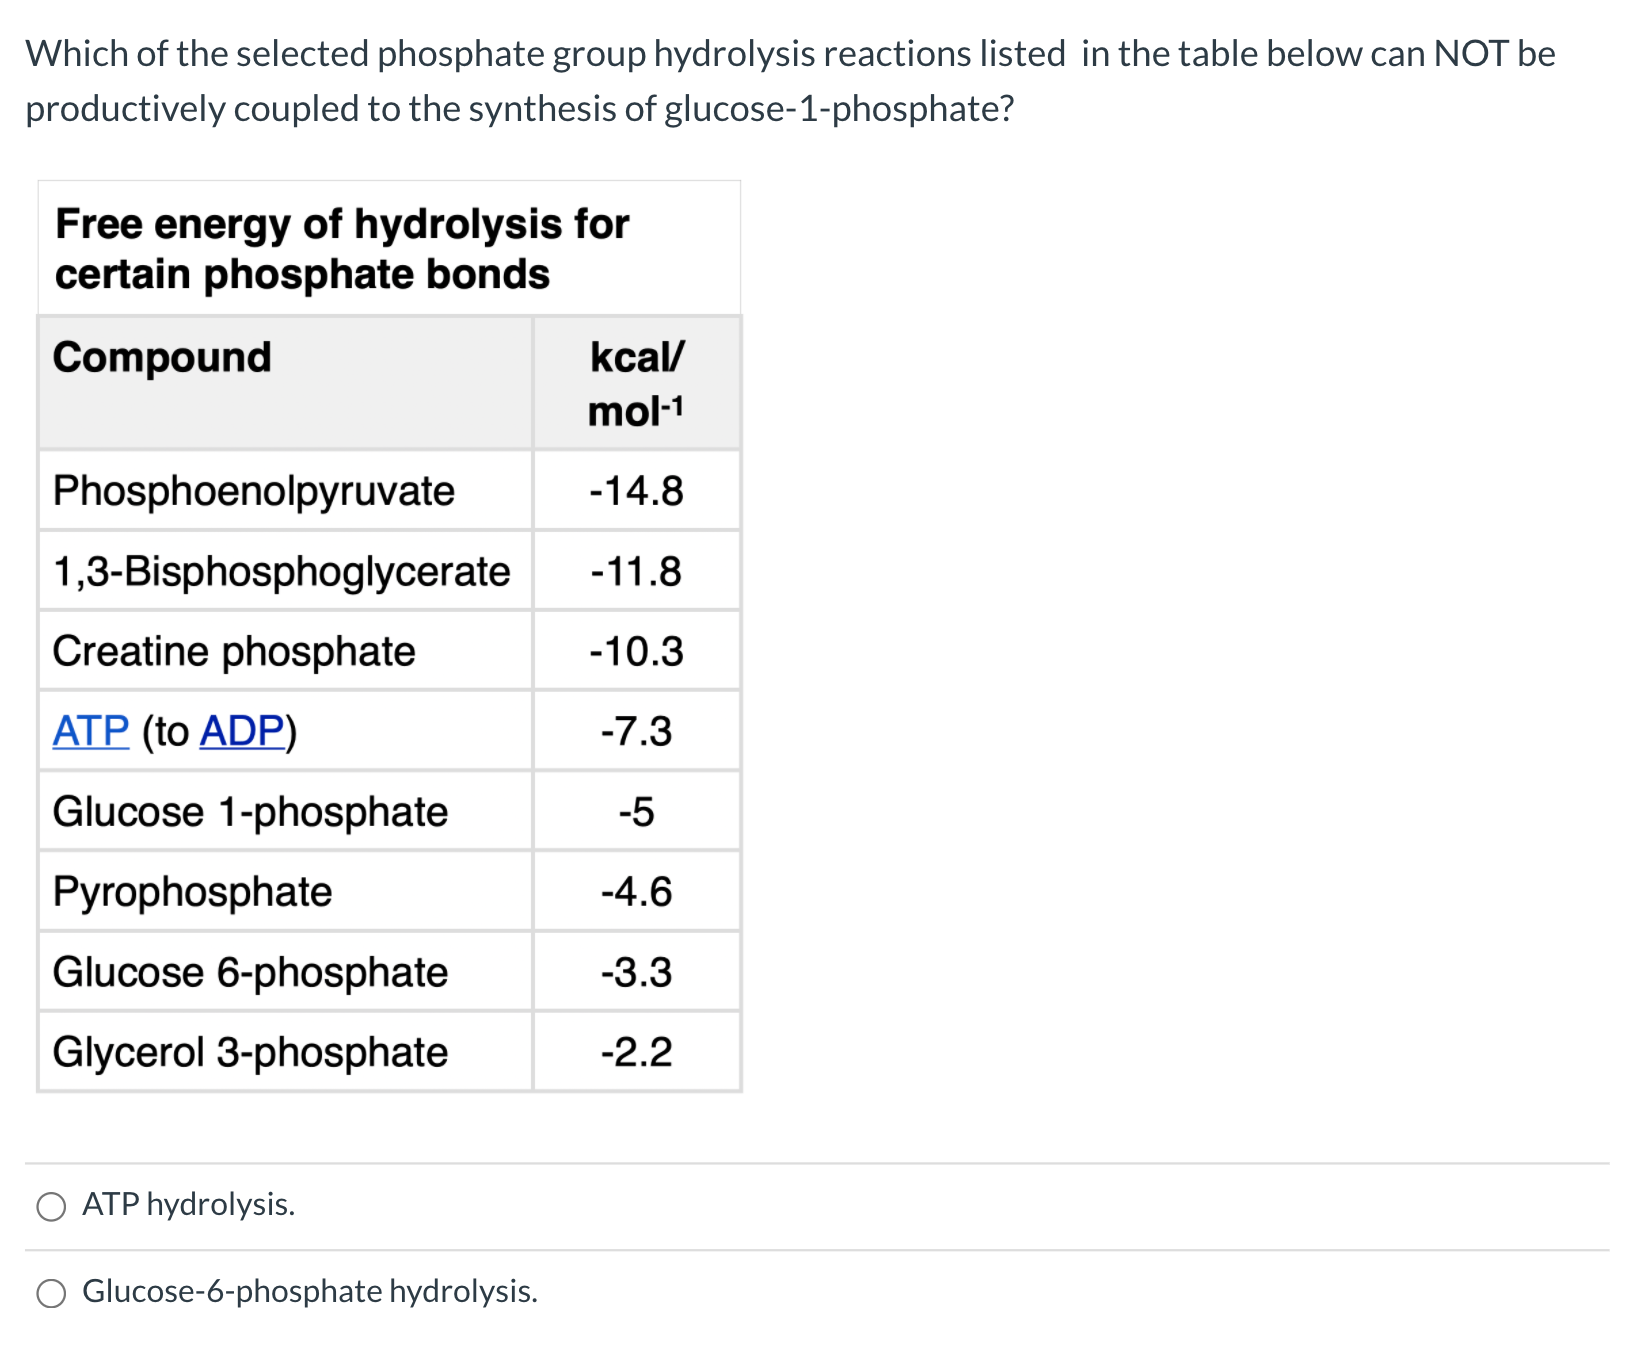 Which of the selected phosphate group hydrolysis reactions listed in the table below can NOT be
productively coupled to the synthesis of glucose-1-phosphate?
Free energy of hydrolysis for
certain phosphate bonds
Compound
kcal/
mol-1
Phosphoenolpyruvate
-14.8
1,3-Bisphosphoglycerate
-11.8
Creatine phosphate
-10.3
ATP (to ADP)
-7.3
Glucose 1-phosphate
-5
Pyrophosphate
-4.6
Glucose 6-phosphate
-3.3
Glycerol 3-phosphate
-2.2
ATP hydrolysis.
Glucose-6-phosphate hydrolysis.
